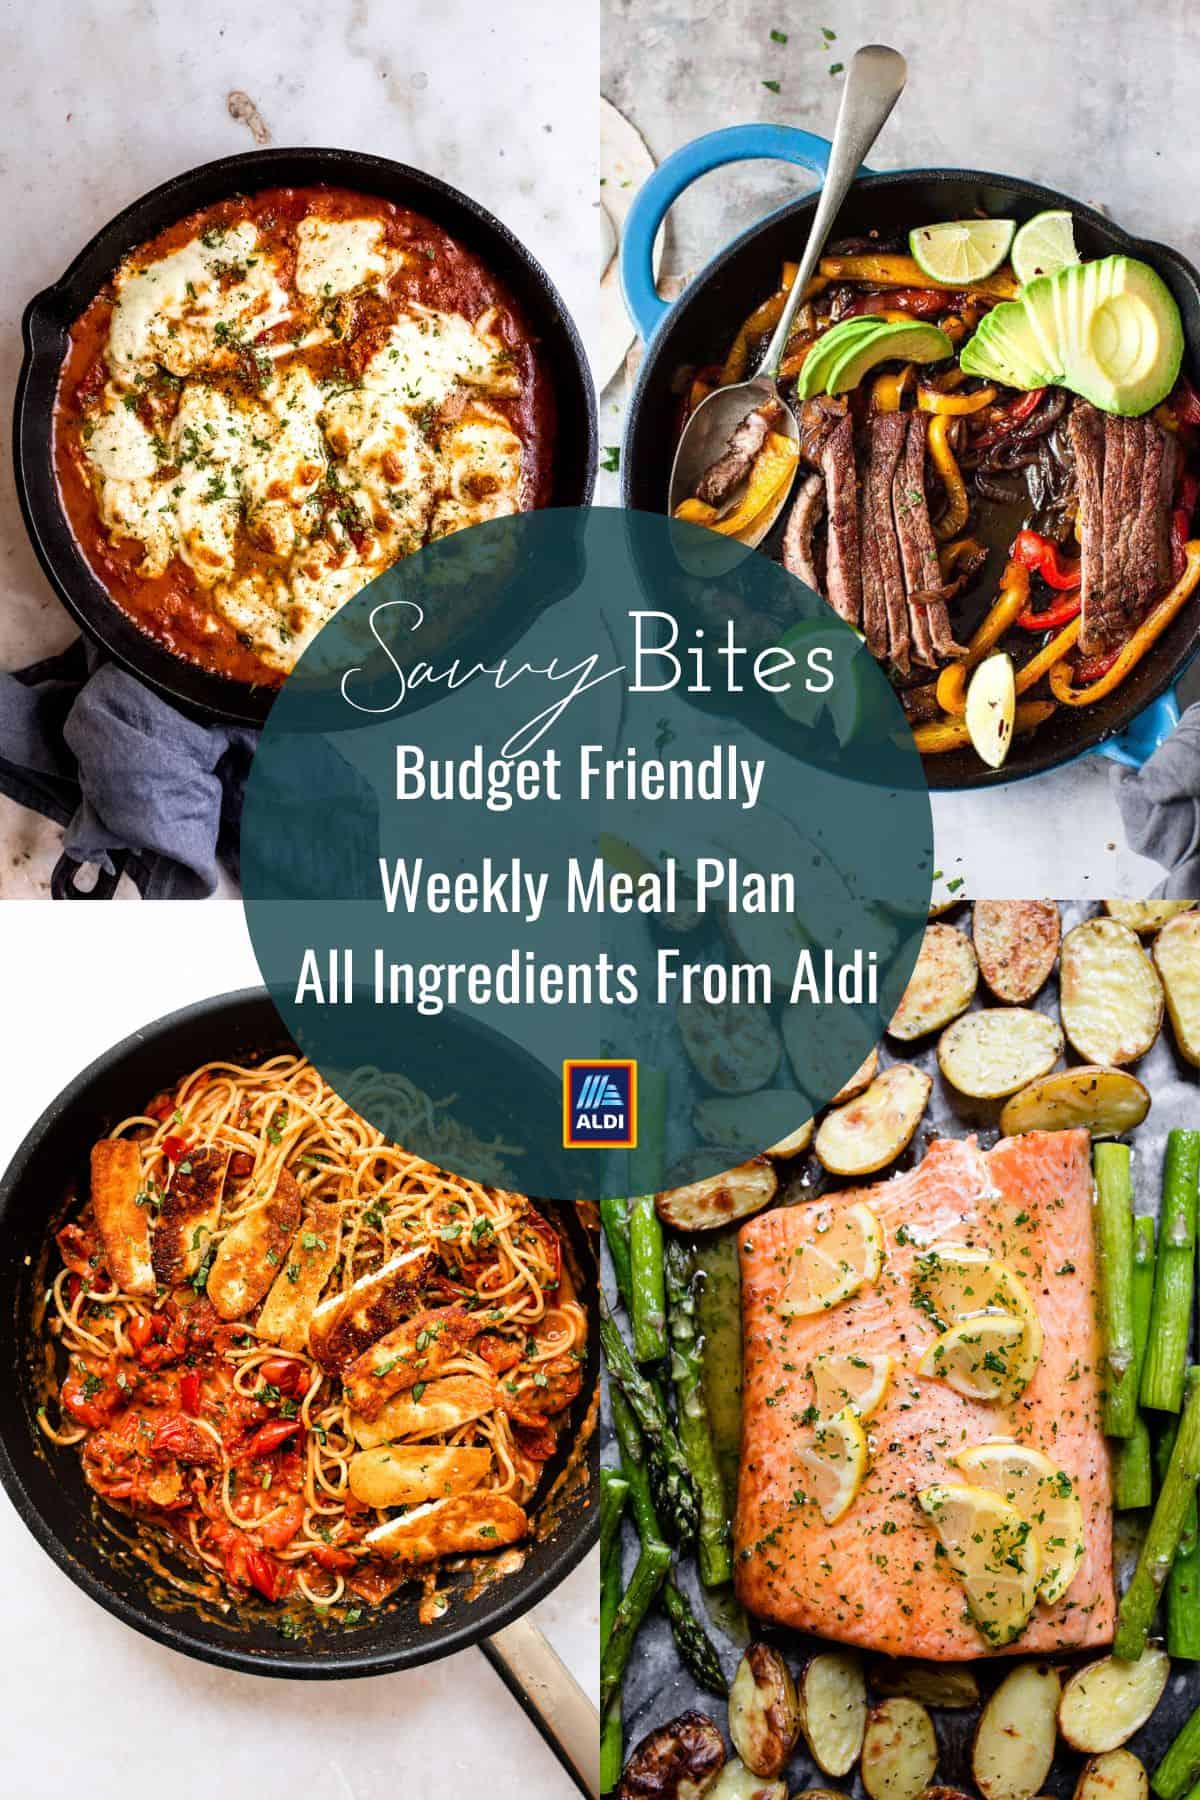 Budget family meal plan photo.